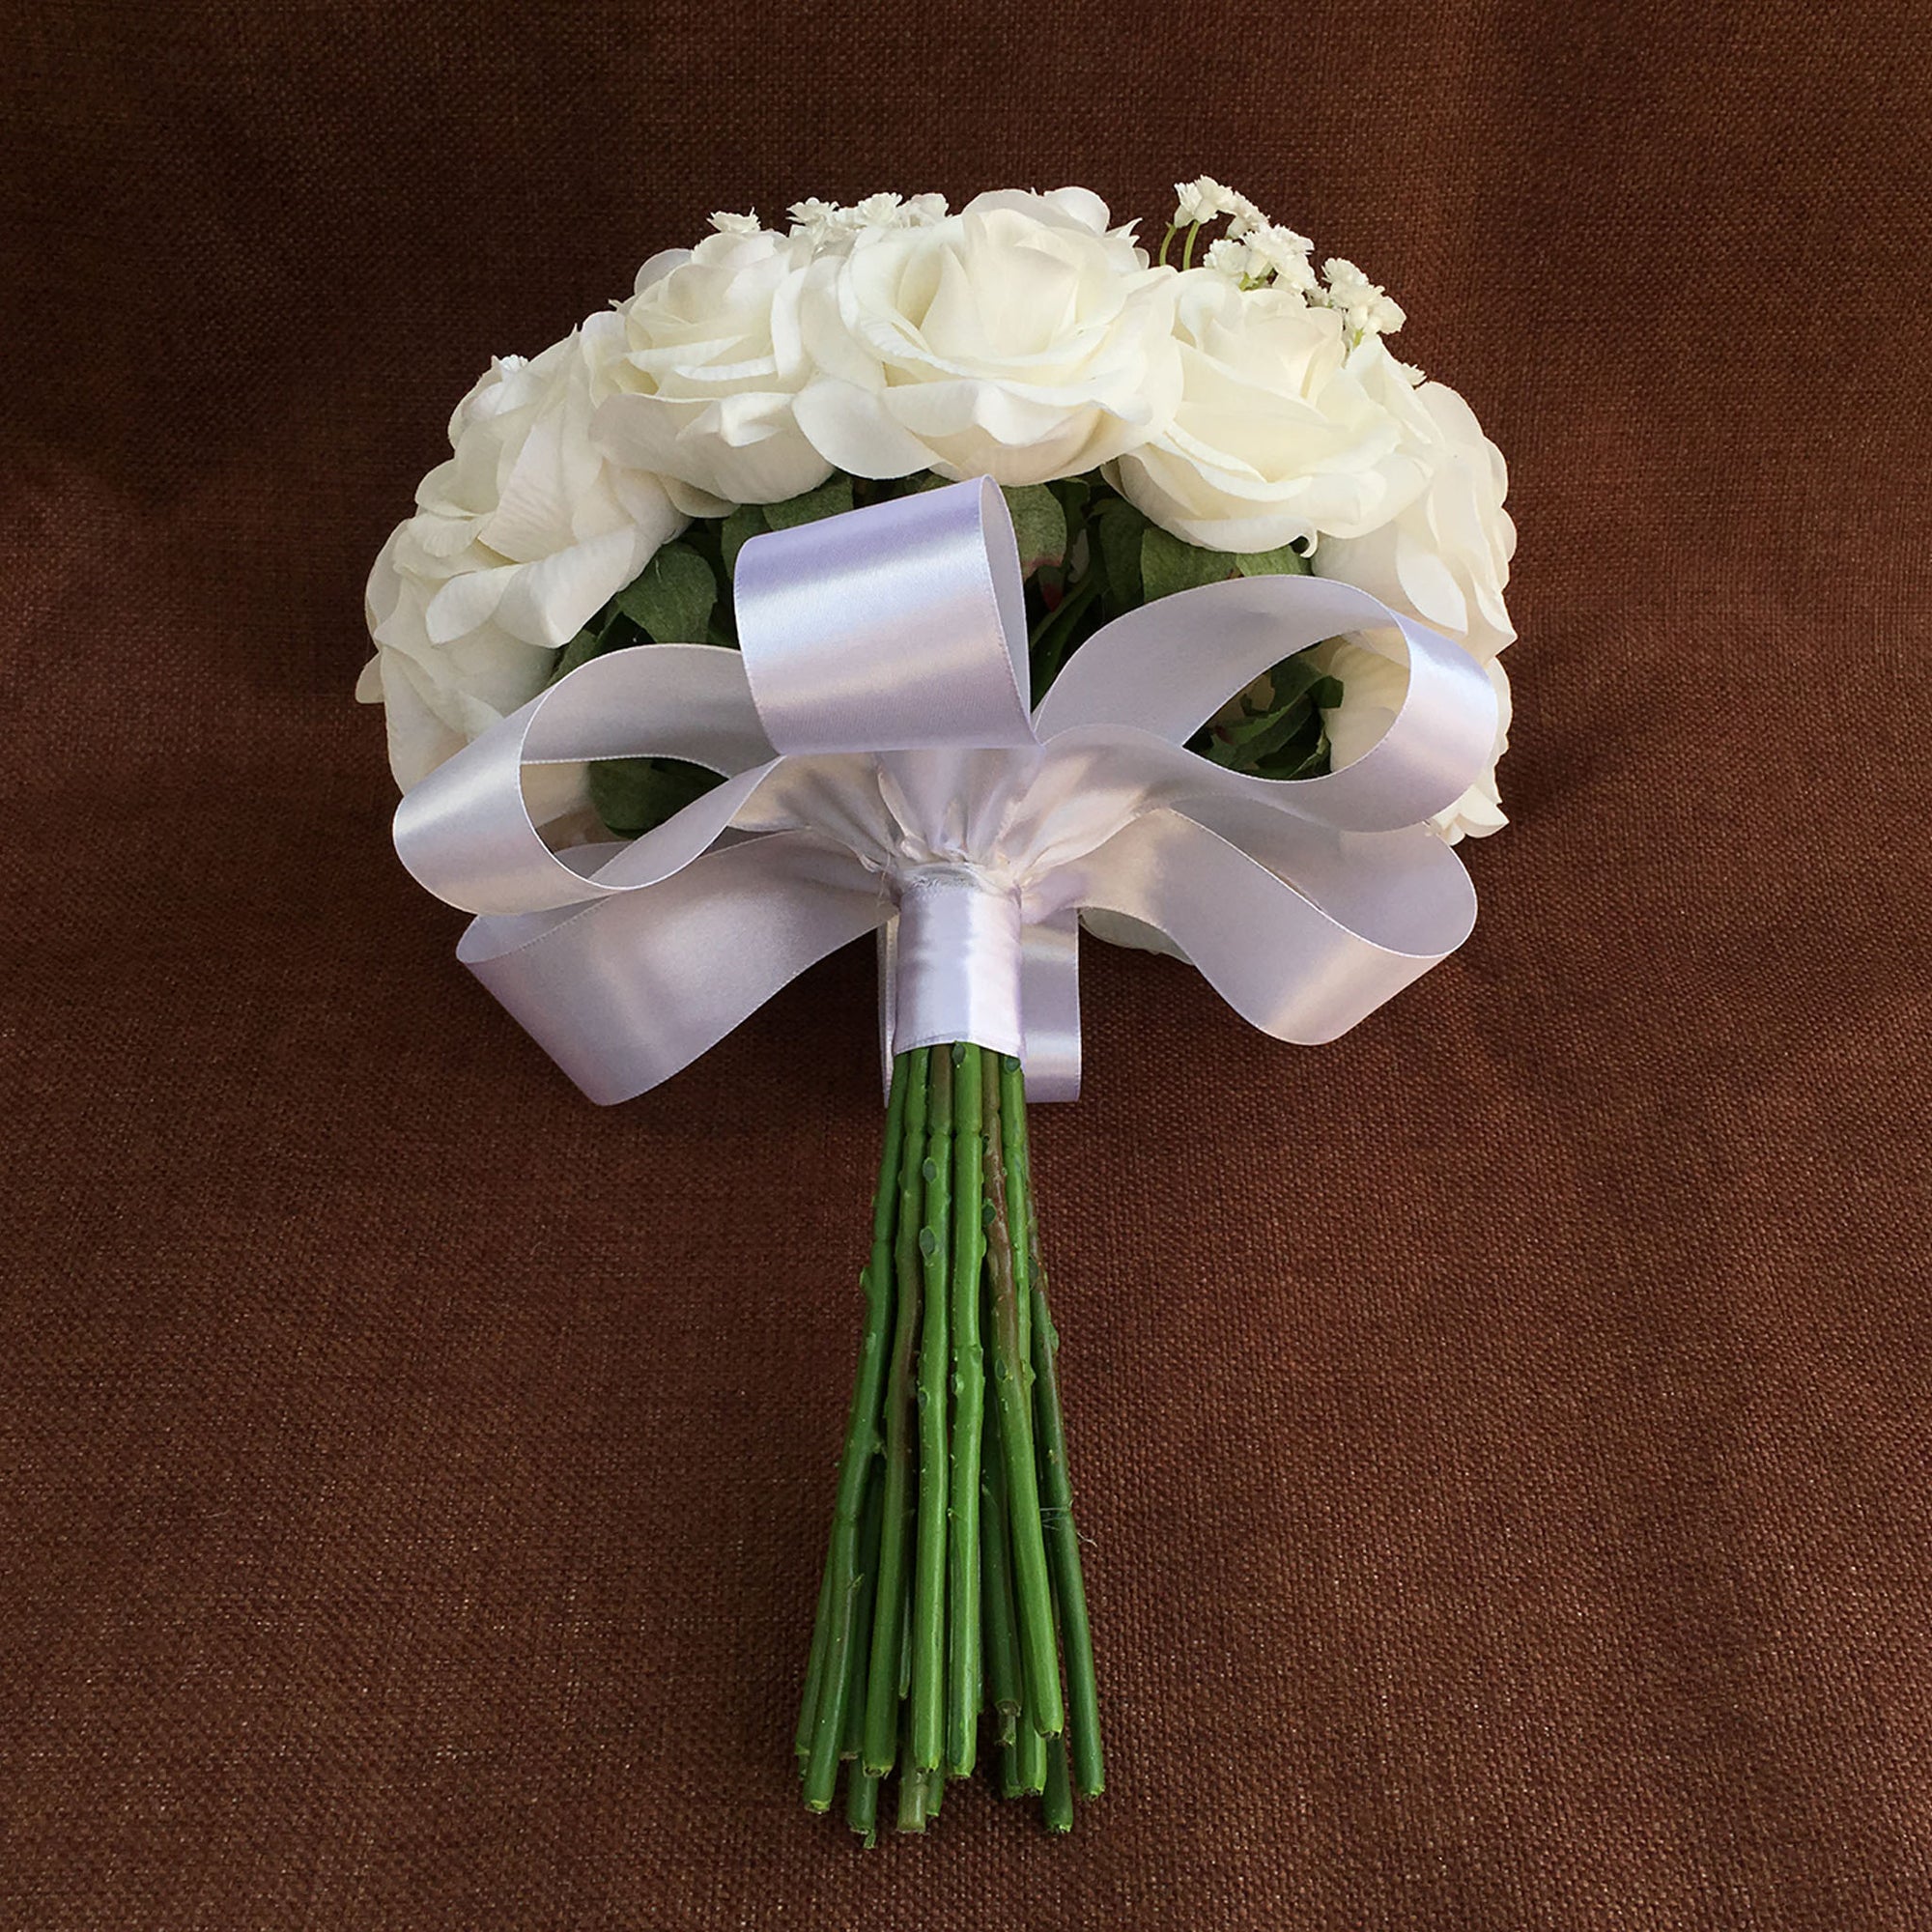 White Rose Bouquet Real Touch Wedding Bridal Flowers